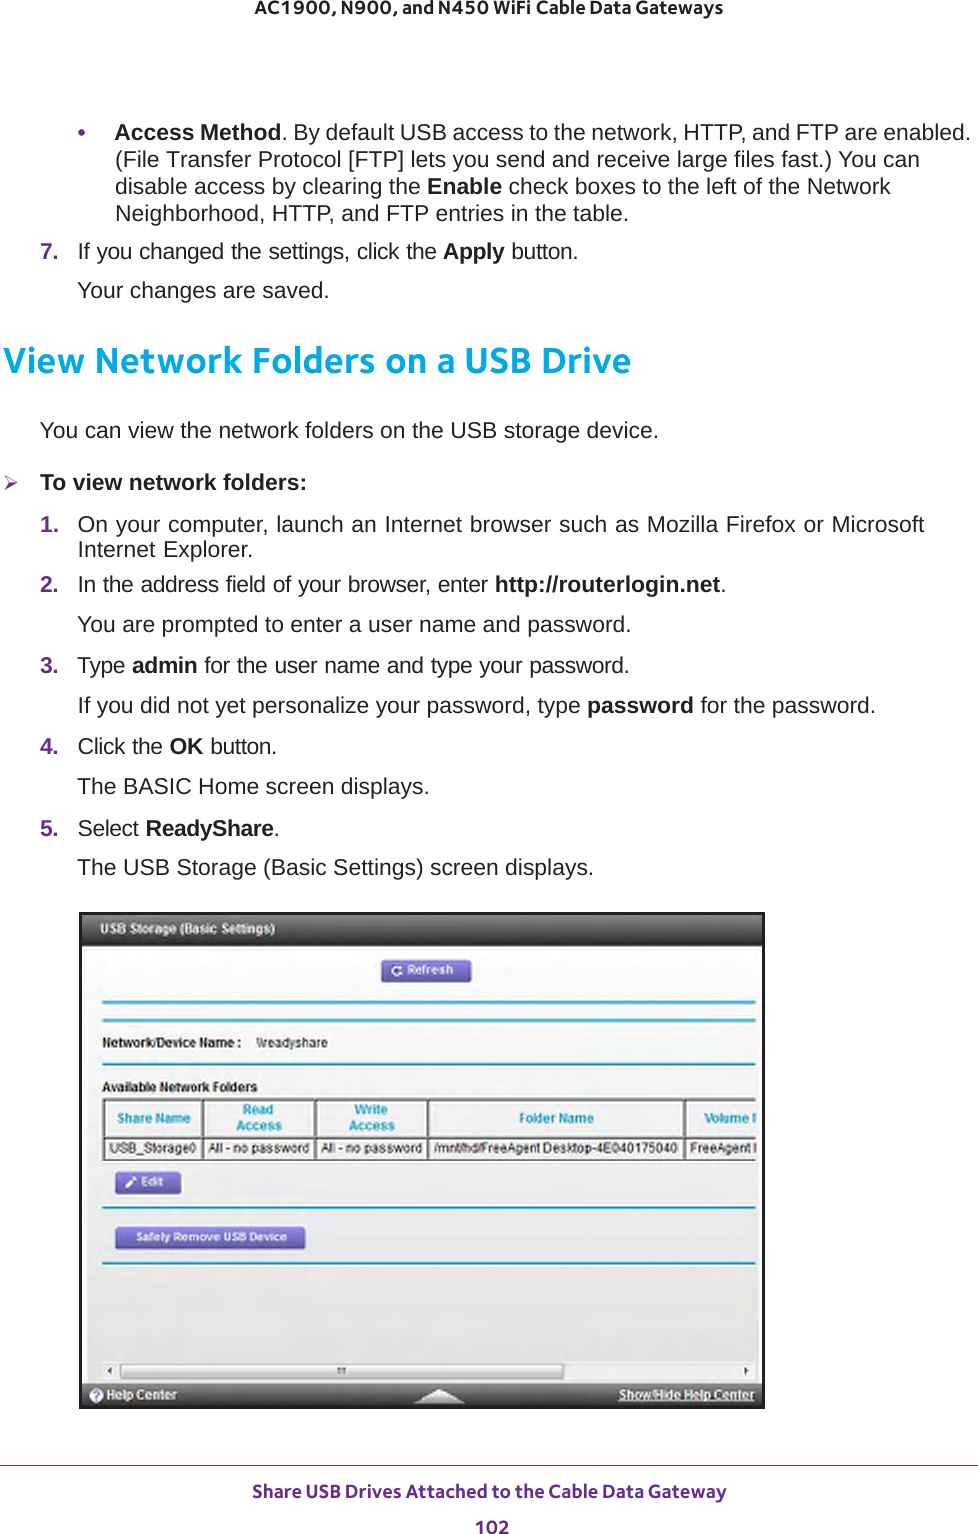 Share USB Drives Attached to the Cable Data Gateway 102AC1900, N900, and N450 WiFi Cable Data Gateways •Access Method. By default USB access to the network, HTTP, and FTP are enabled. (File Transfer Protocol [FTP] lets you send and receive large files fast.) You can disable access by clearing the Enable check boxes to the left of the Network Neighborhood, HTTP, and FTP entries in the table.7.  If you changed the settings, click the Apply button.Your changes are saved.View Network Folders on a USB DriveYou can view the network folders on the USB storage device.To view network folders:1.  On your computer, launch an Internet browser such as Mozilla Firefox or Microsoft Internet Explorer. 2.  In the address field of your browser, enter http://routerlogin.net.You are prompted to enter a user name and password.3.  Type admin for the user name and type your password.If you did not yet personalize your password, type password for the password.4.  Click the OK button. The BASIC Home screen displays.5.  Select ReadyShare.The USB Storage (Basic Settings) screen displays.